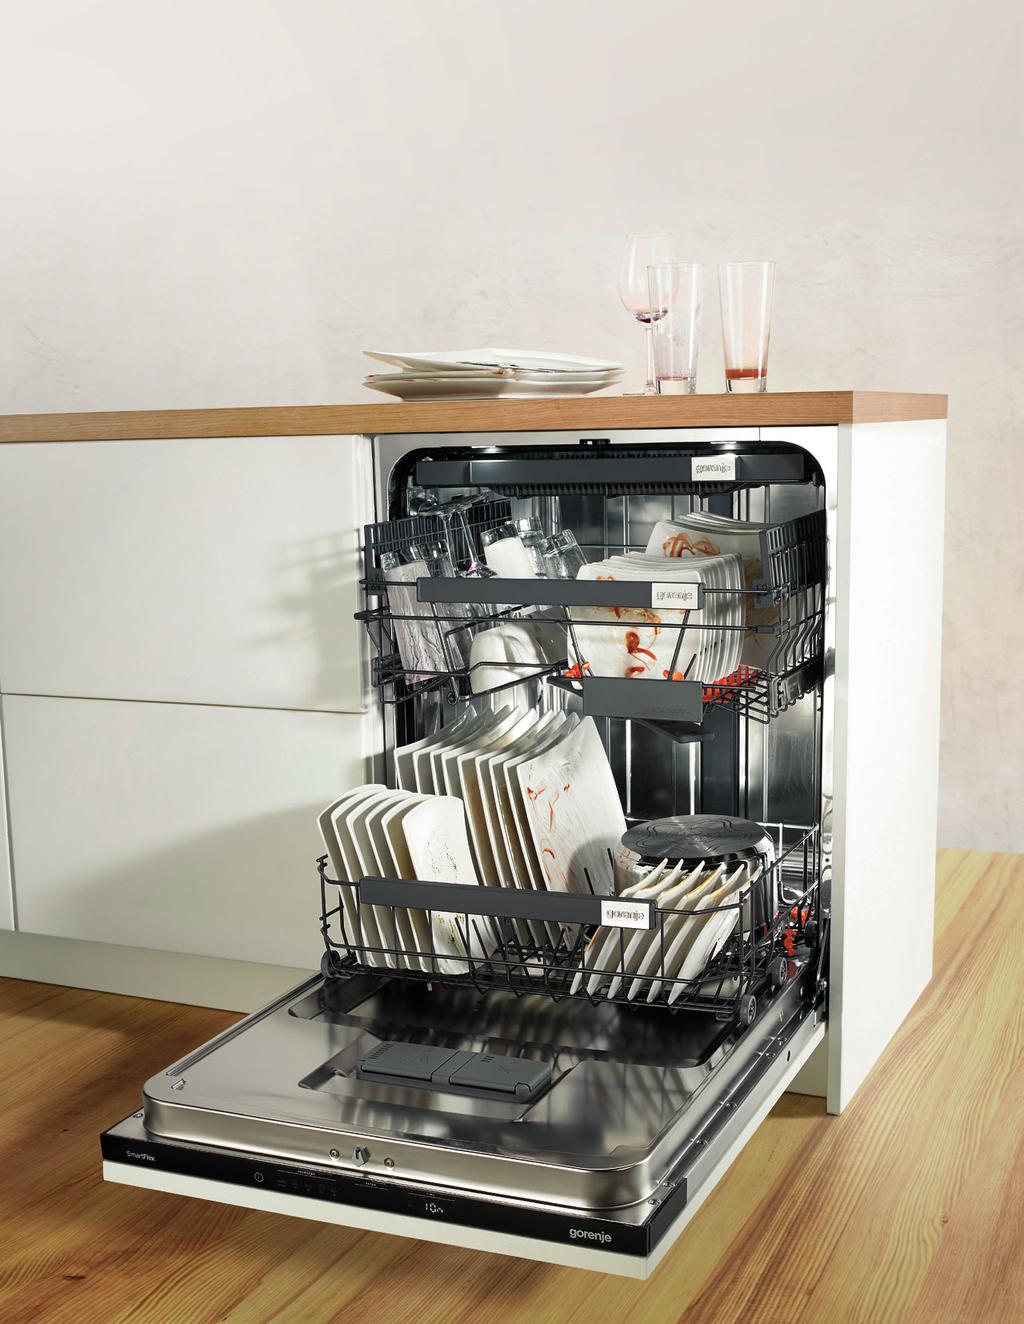 DISHWSHERS I 3 GORENJE DISHWSHERS The perfect result, smart solutions, excellent user experience SmartFlex dishwashers draw inspiration from the contemporary lifestyle.